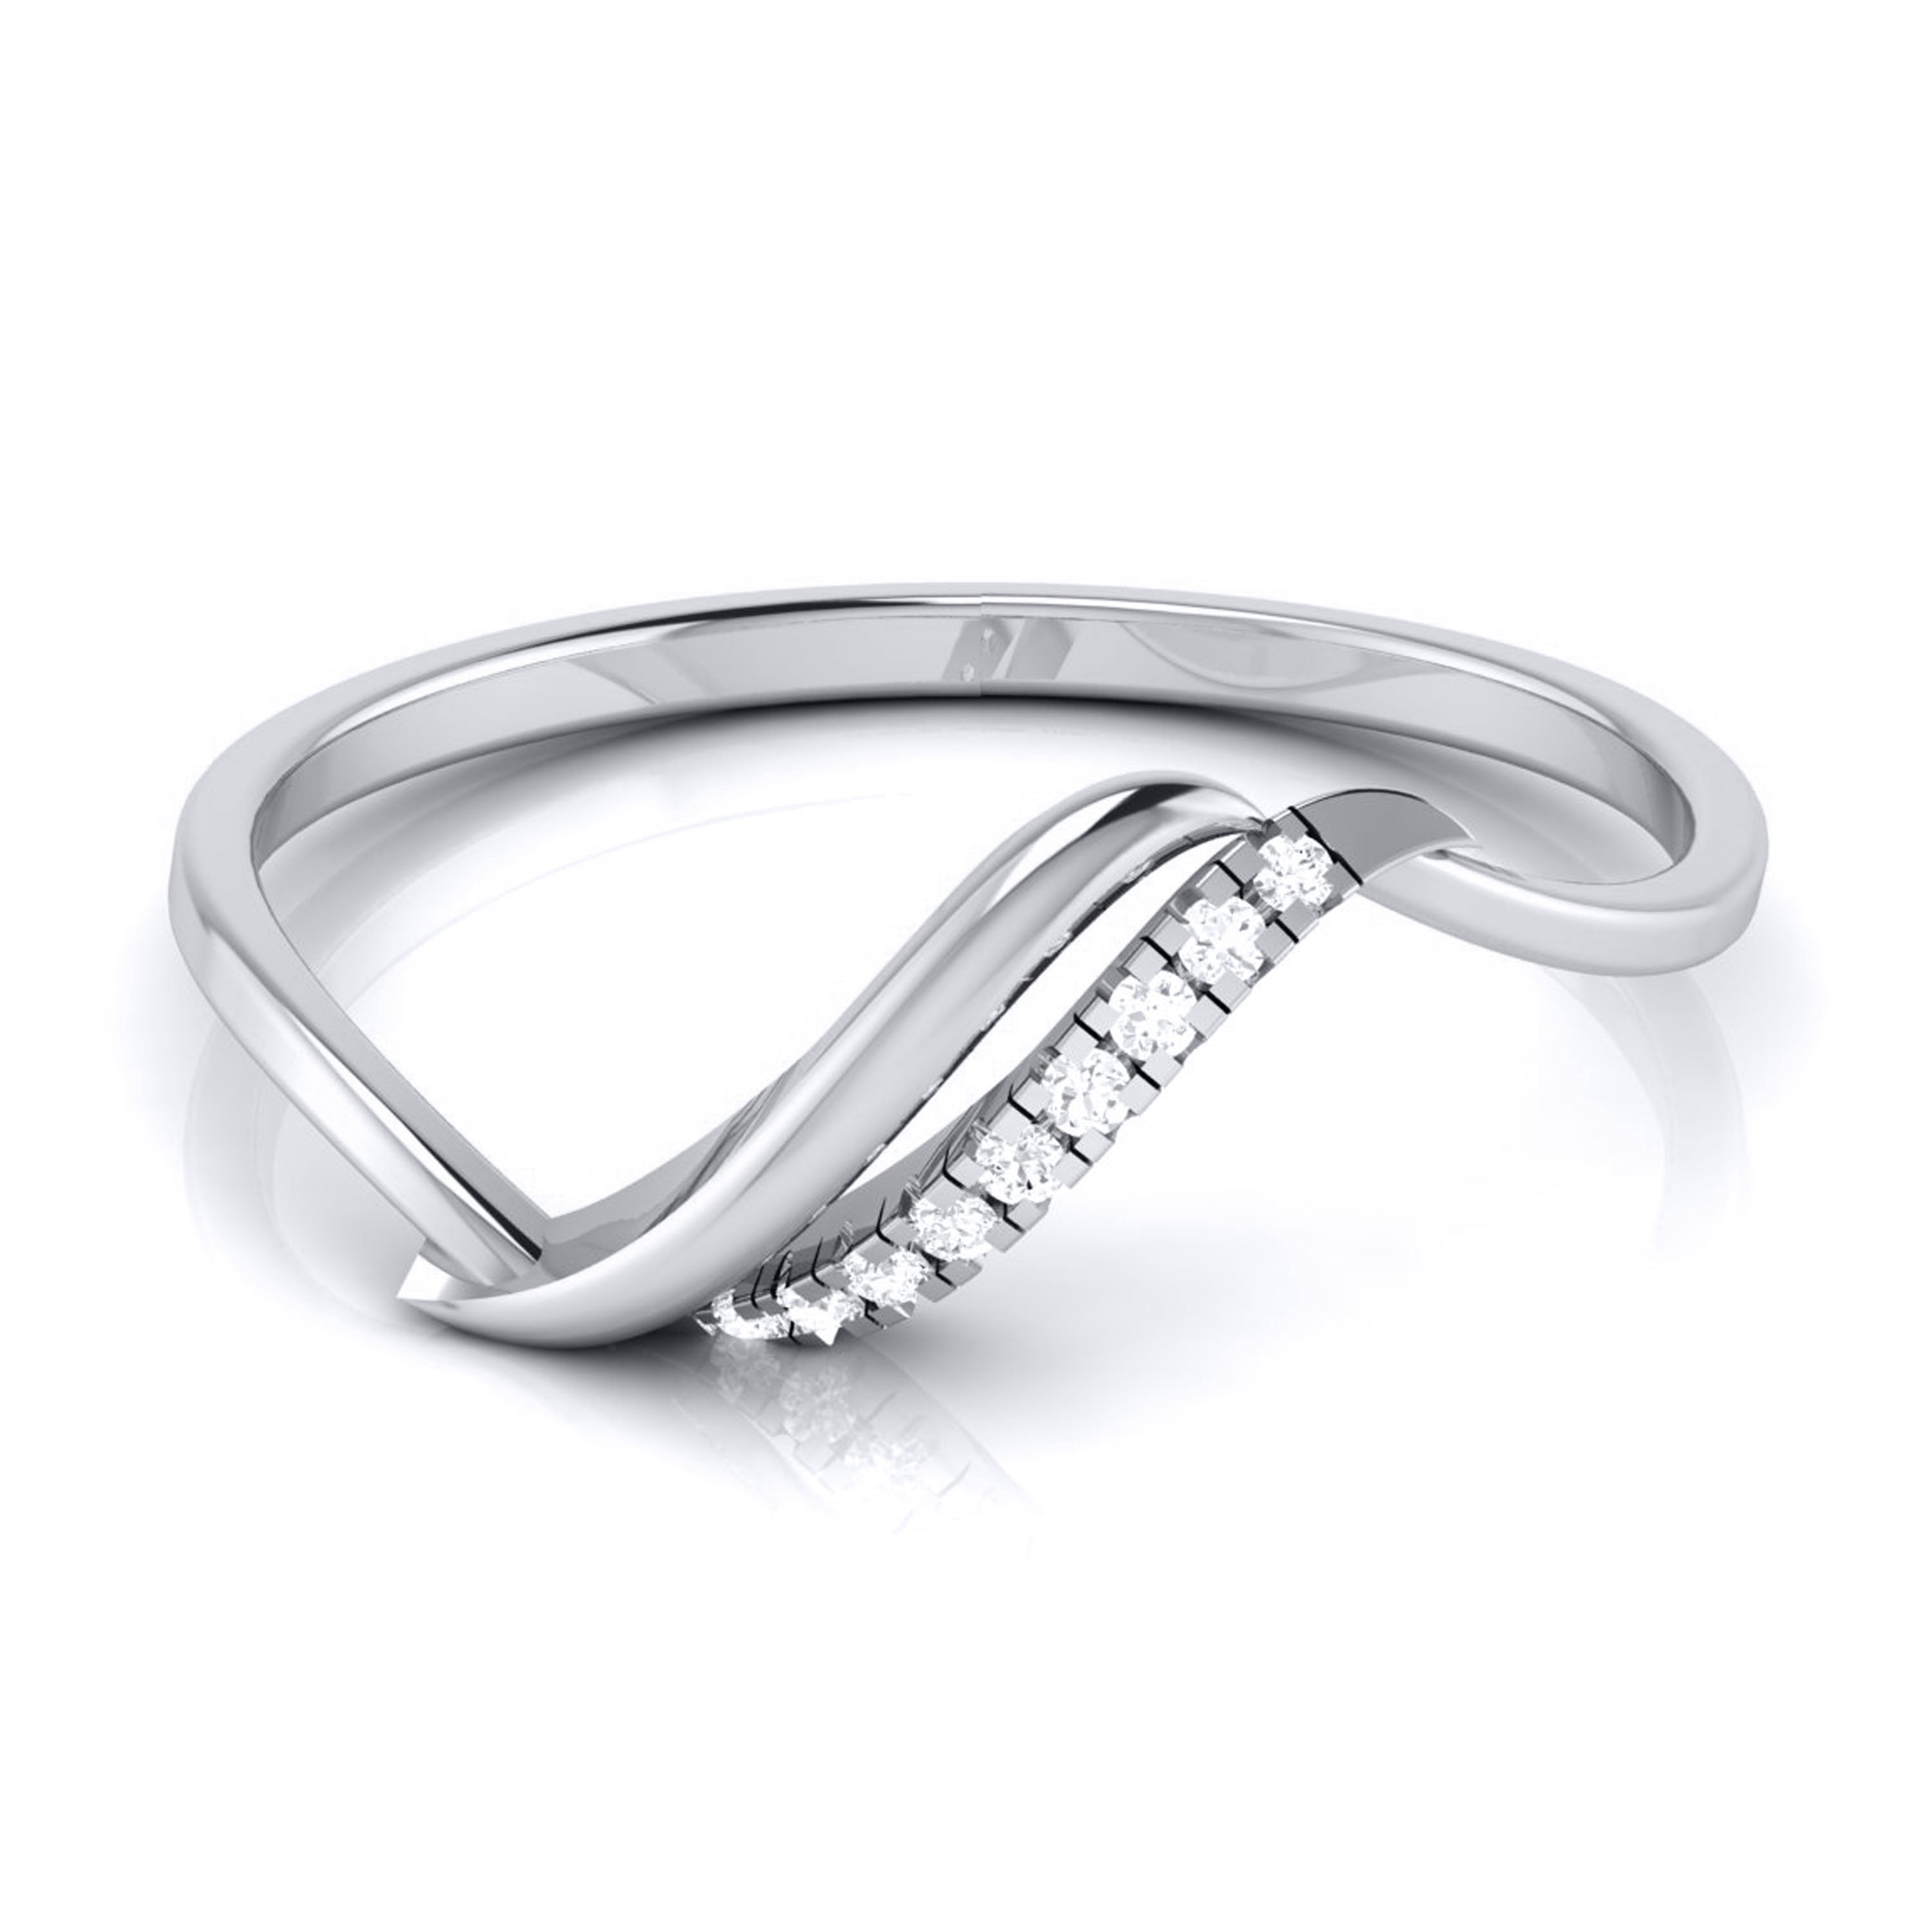 200+ Platinum Rings For Women With Price - Candere by Kalyan Jewellers